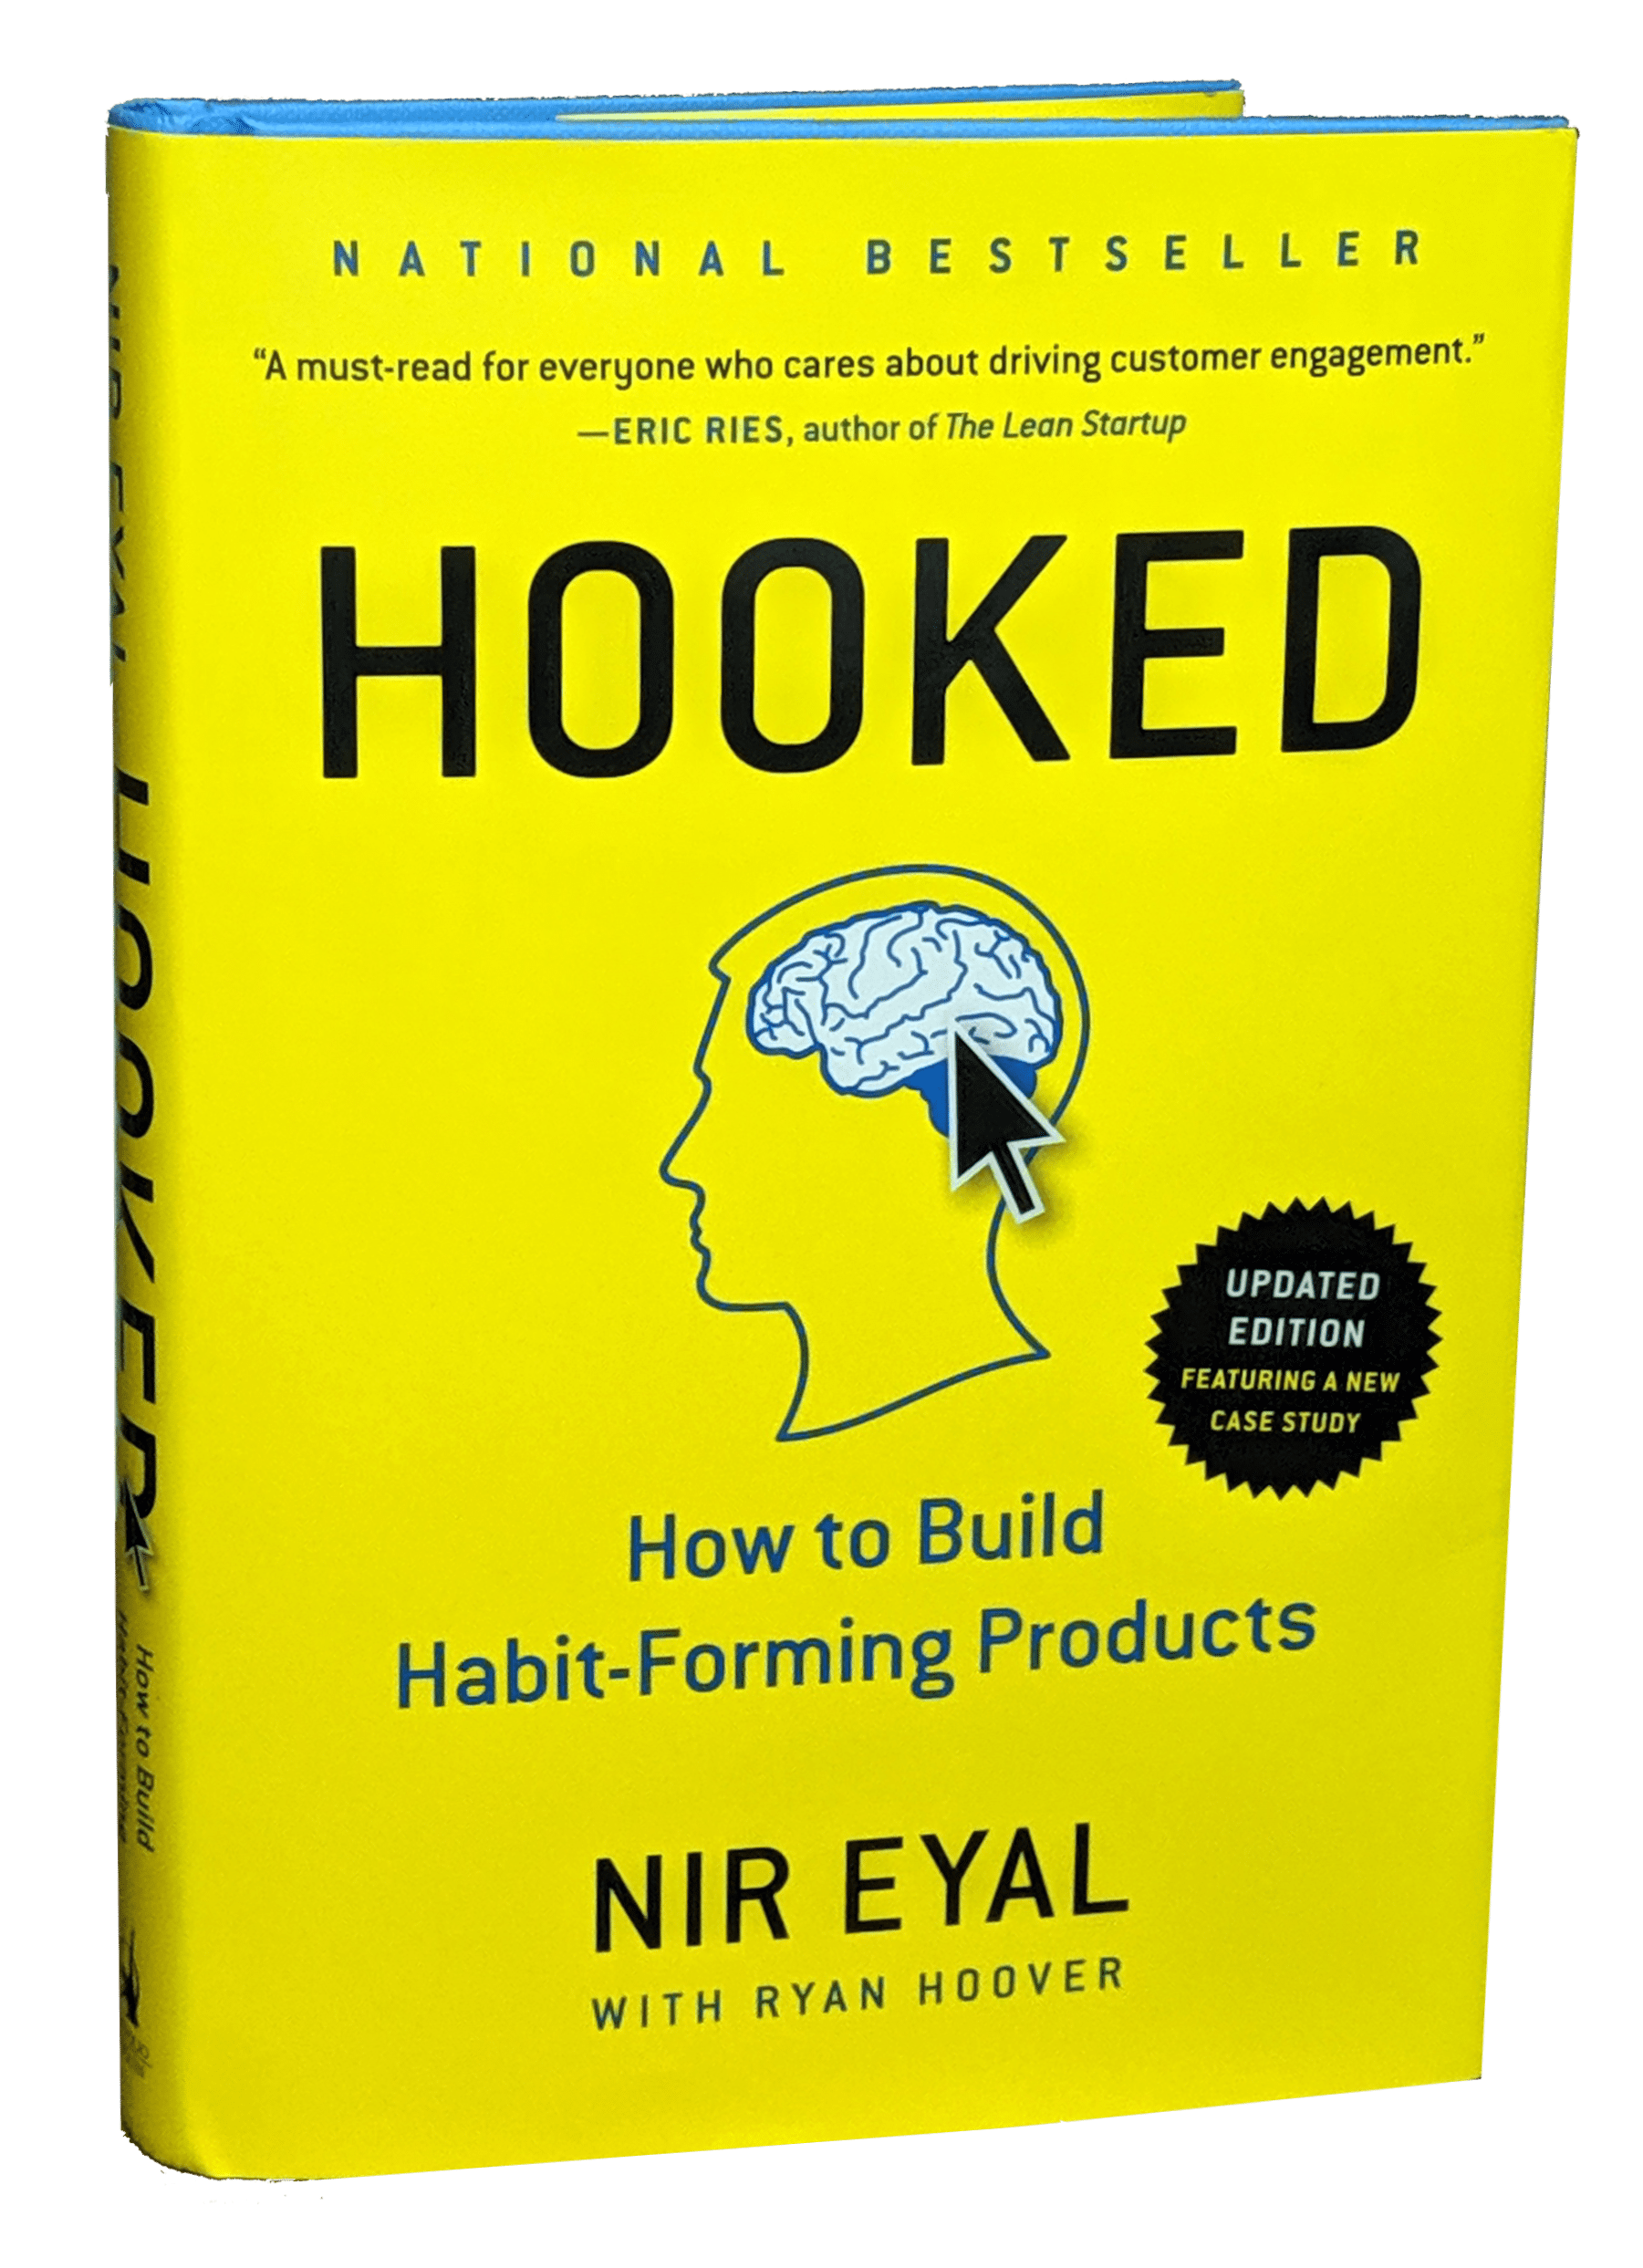 Hooked Book- Product Design To Boost Customer Engagement | Nir Eyal